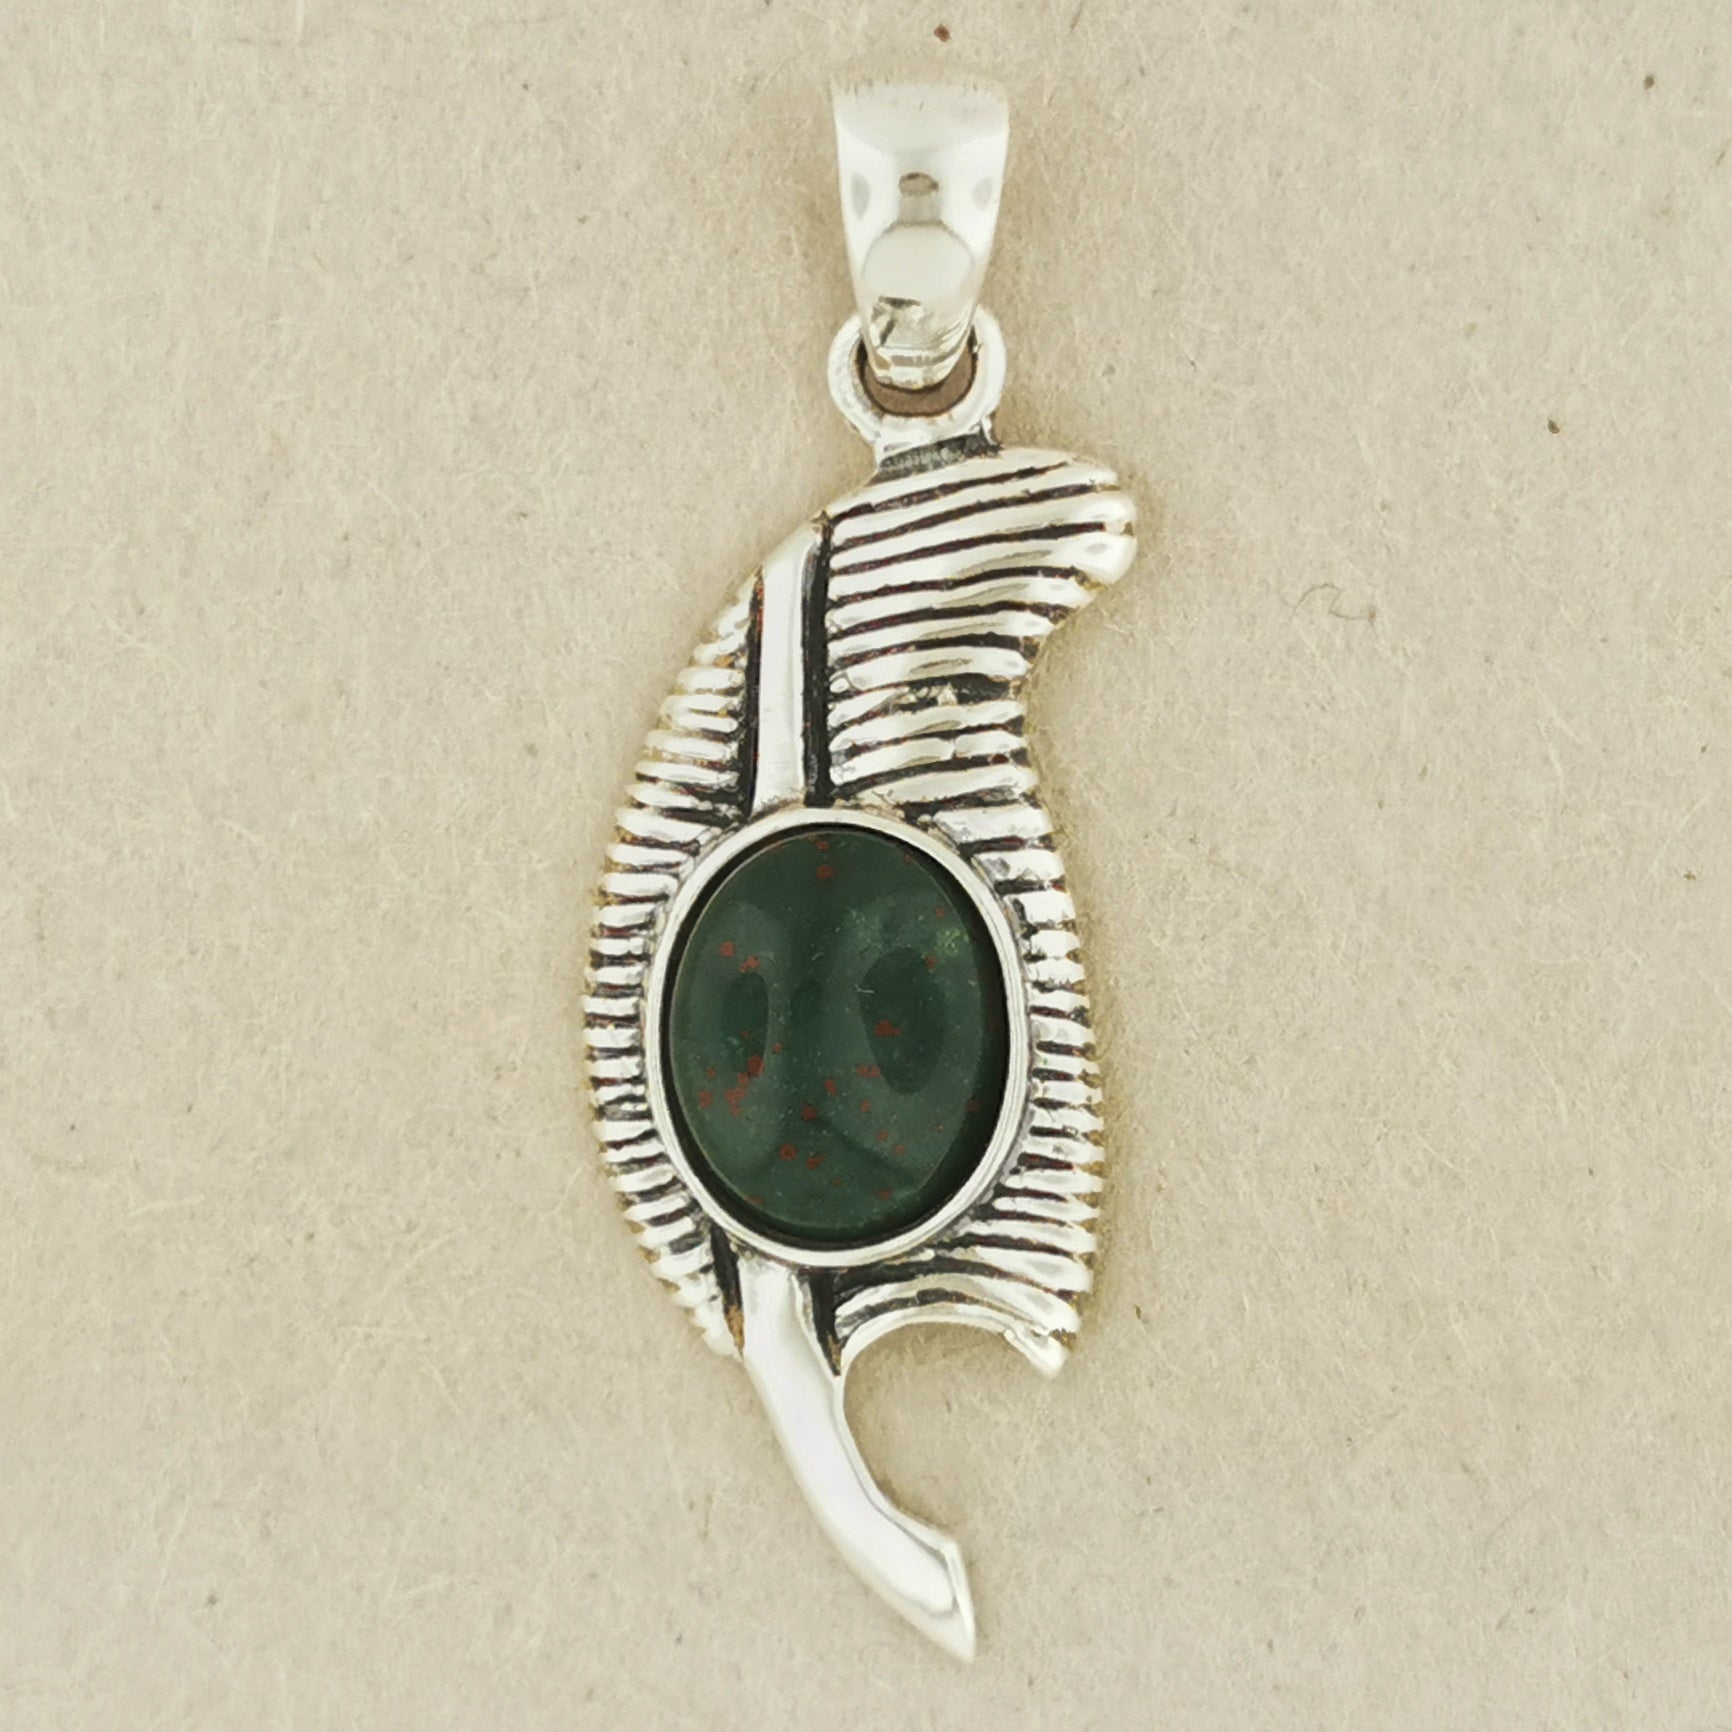 Feather of Ma'at Pendant in Sterling Silver with Bloodstone Jasper, Egyptian Feather Pendant, Egyptian Goddess Pendant, Goddess of Truth Pendant, Silver Egyptian Feather Pendant, Silver Ma’at Pendant, Egyptian Silver Pendant, Silver Gemstone Egyptian Feather Pendant